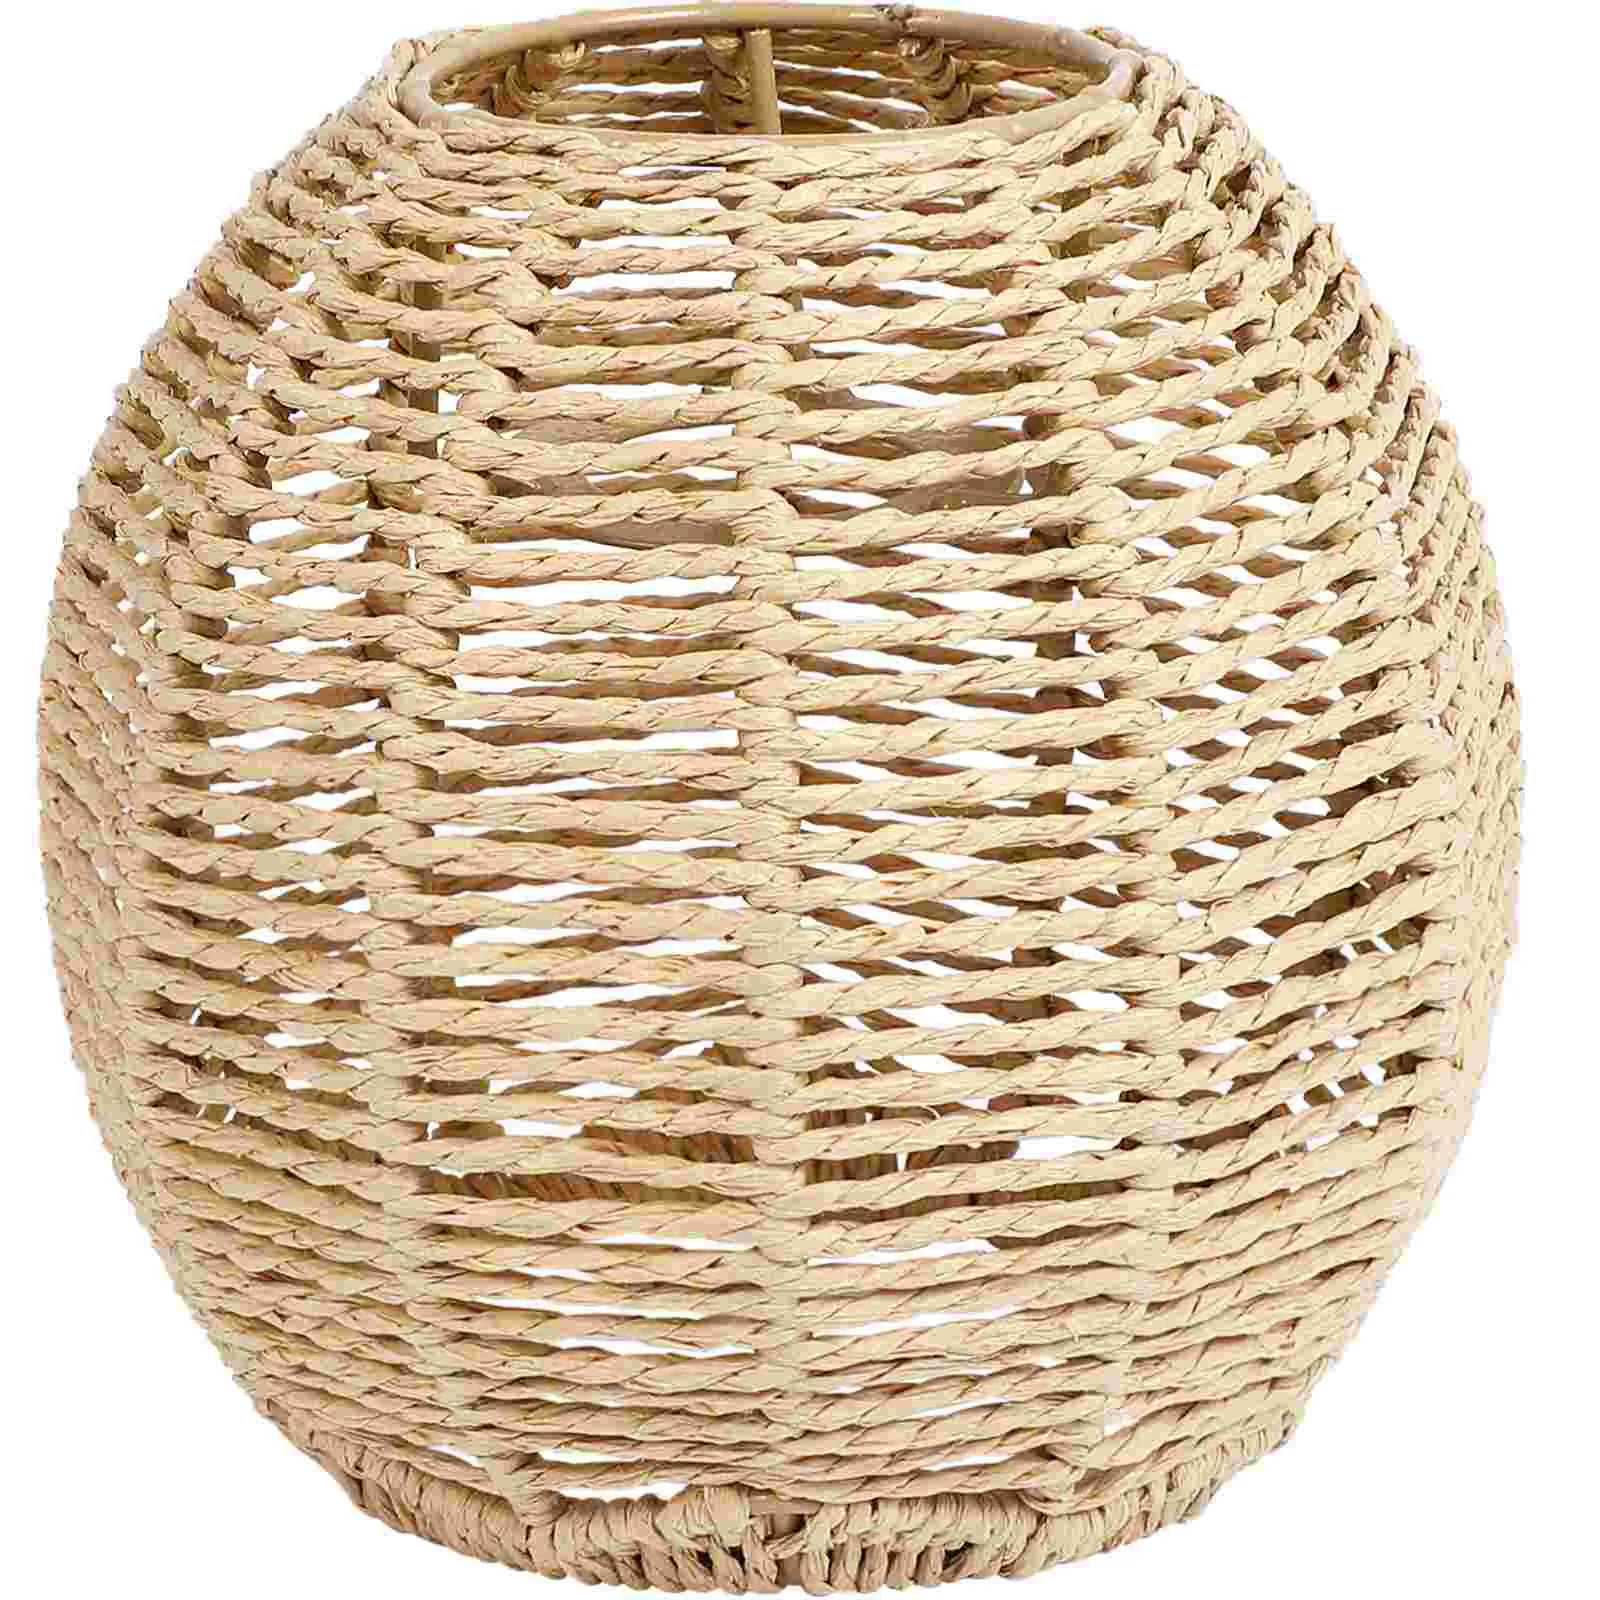 

Imitation Rattan Lampshade Woven Light Fixture Basket Chandelier New Chinese Style Cover Bulb Pendant for ceiling Lampshades